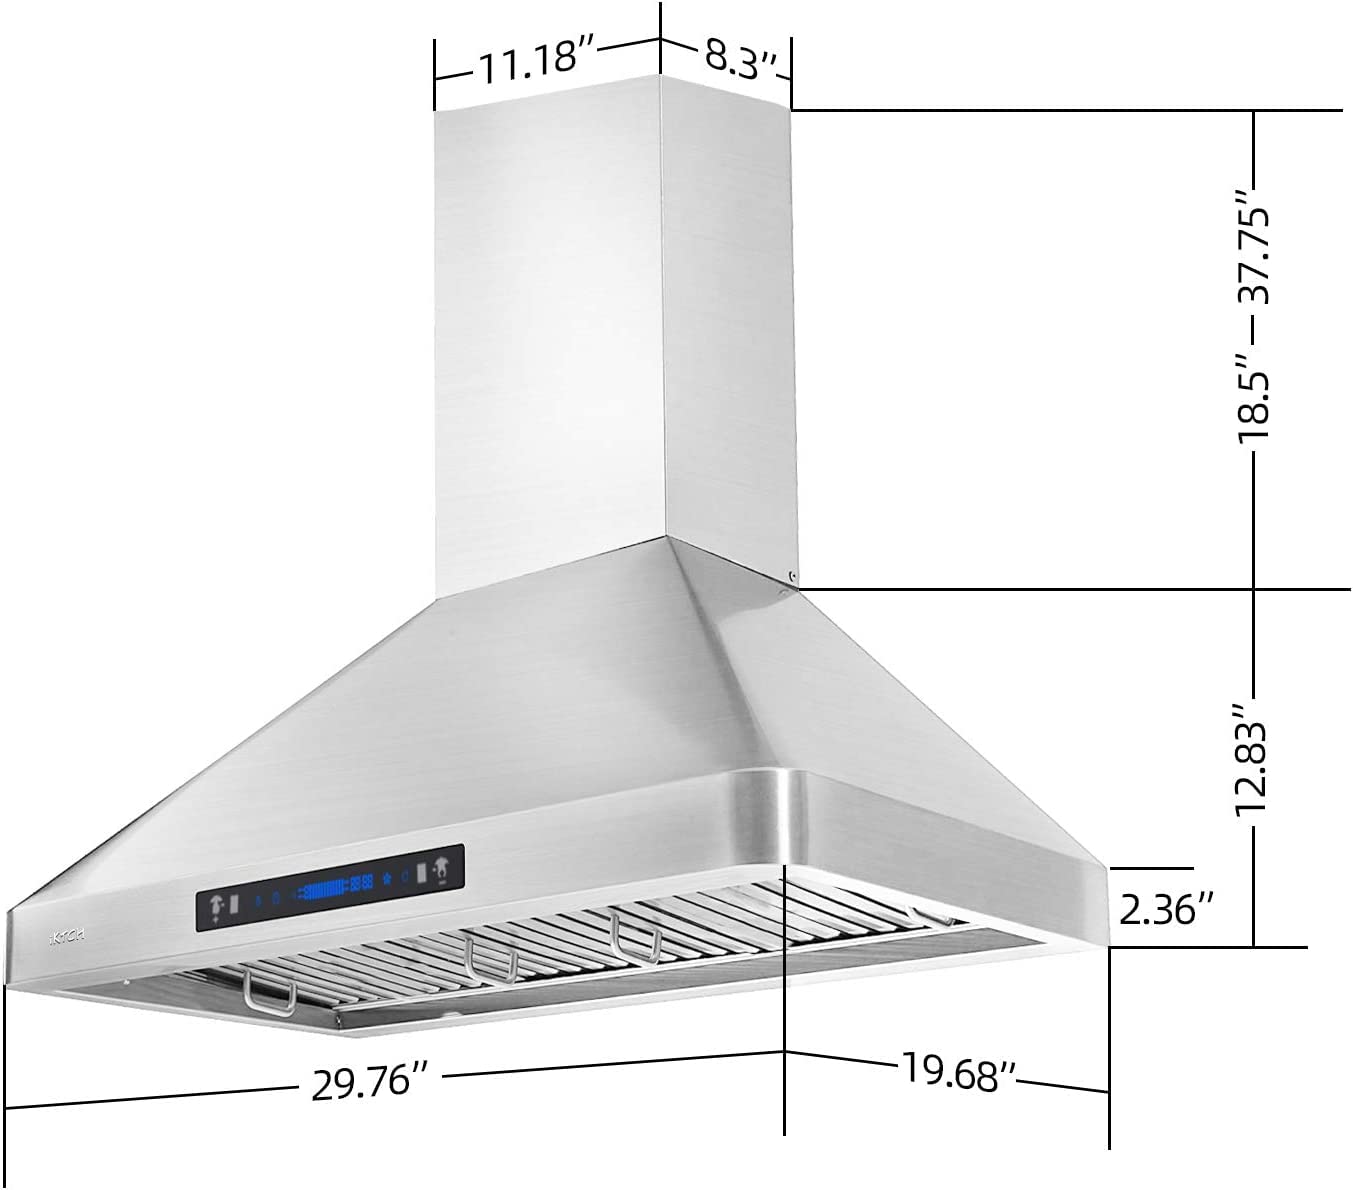 IKTCH Wall Mounted Range Hood 30 inch, 900 CFM Ducted/Ductless Range Hood, Stainless Steel Range Hood with Gesture Sensing & Touch Control IKP02R-30